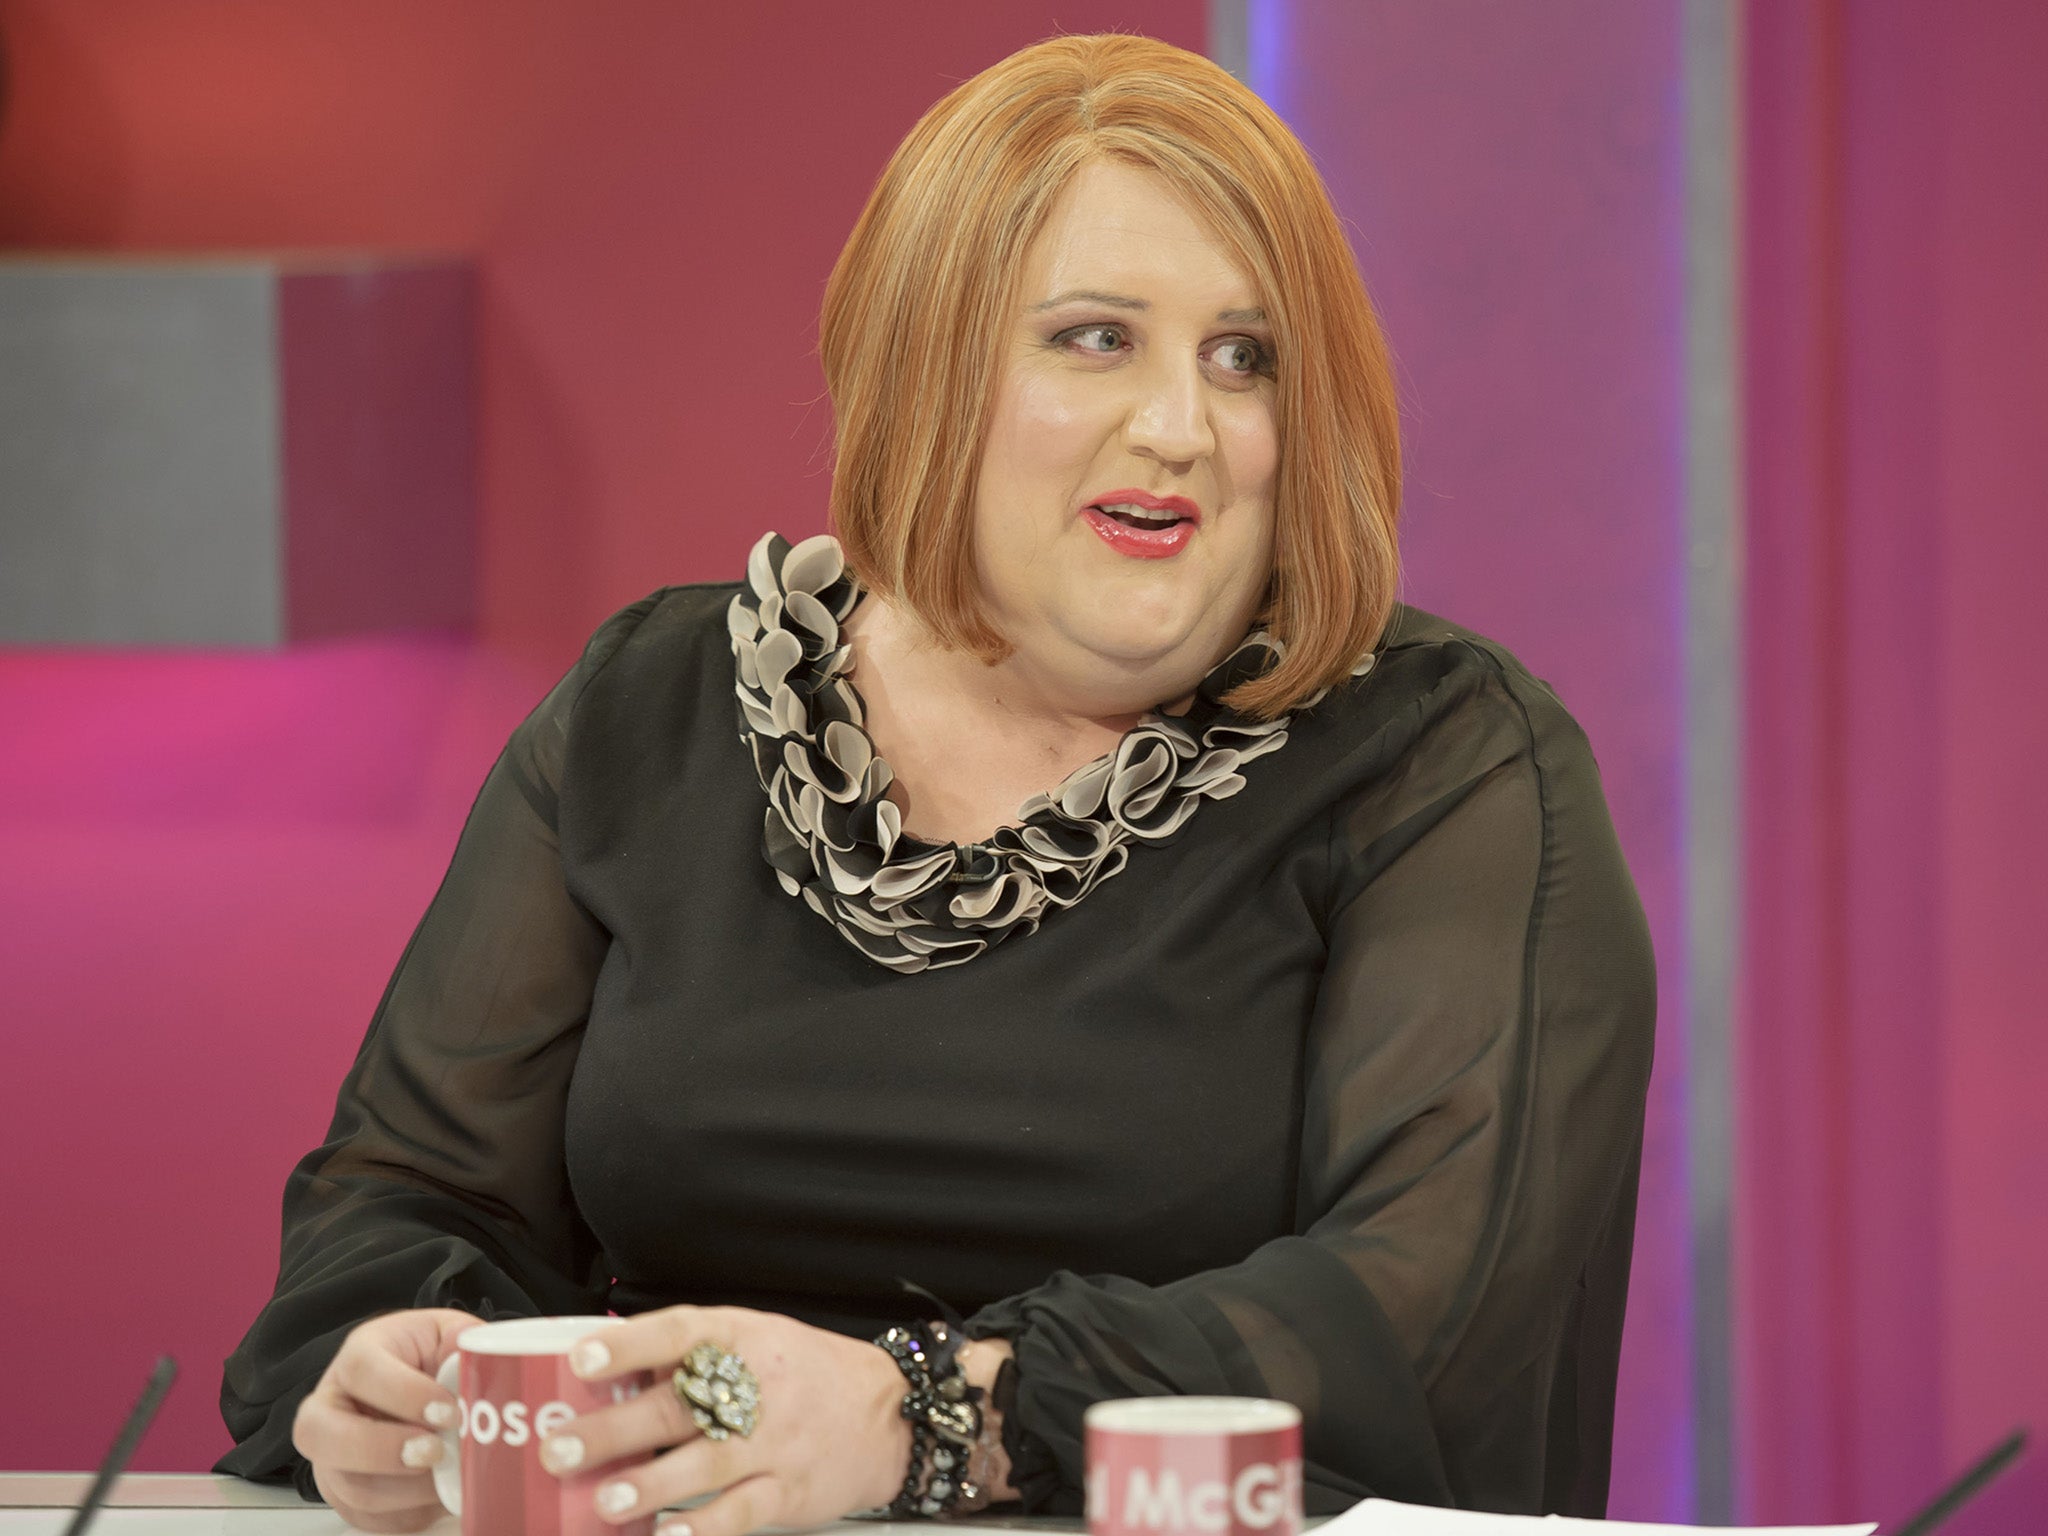 Peter Kay as Geraldine McQueen, one of his most beloved characters